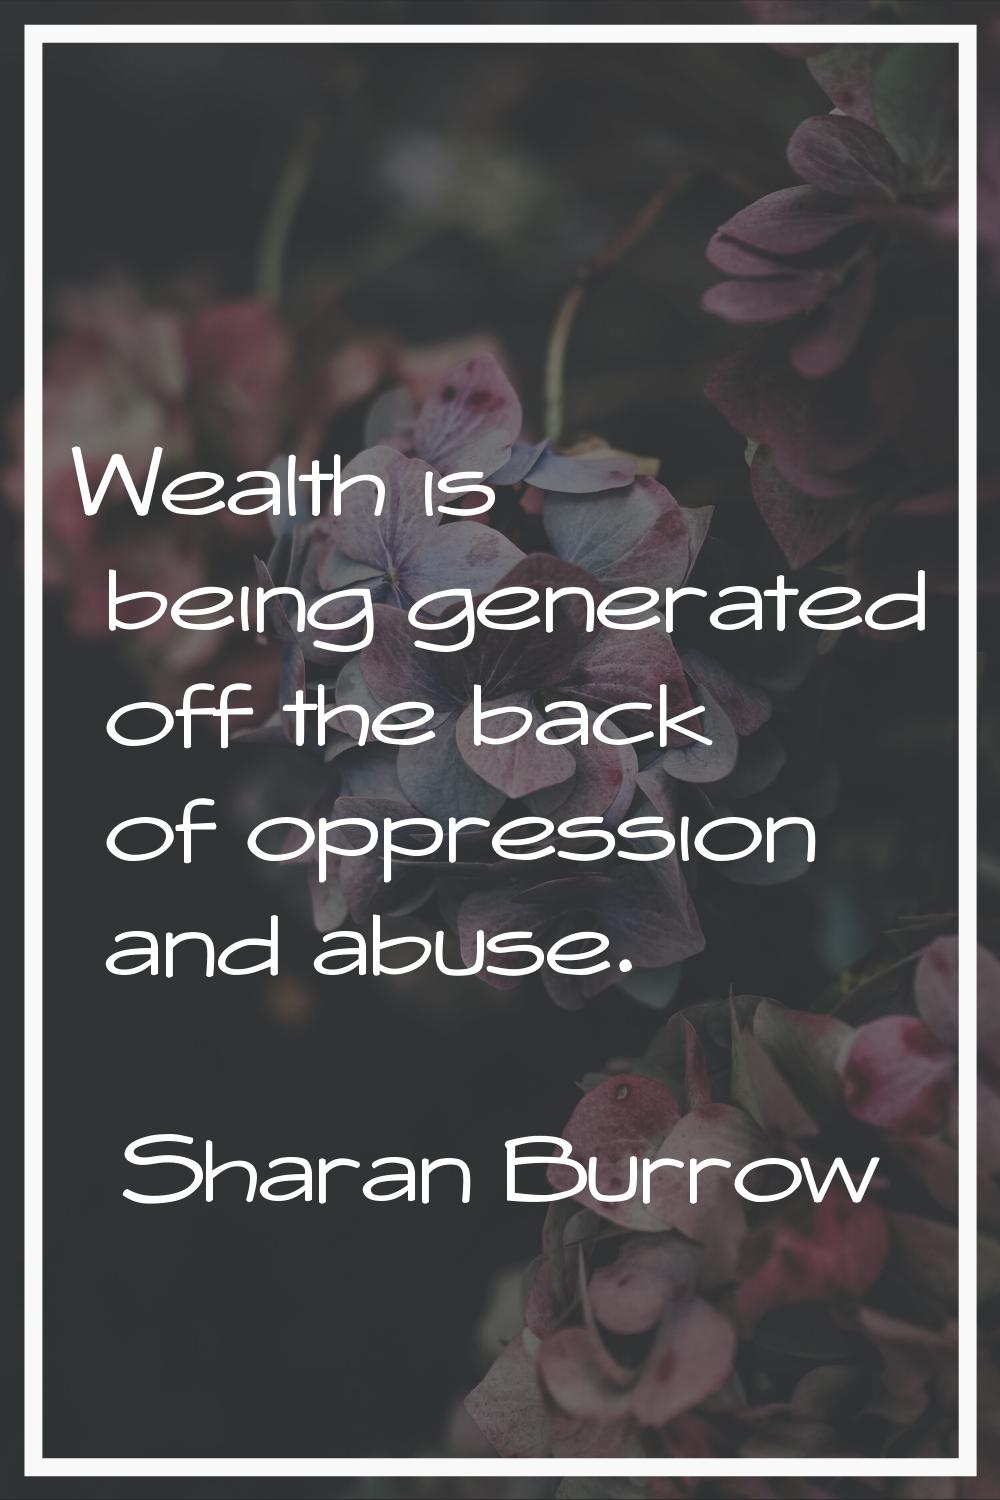 Wealth is being generated off the back of oppression and abuse.